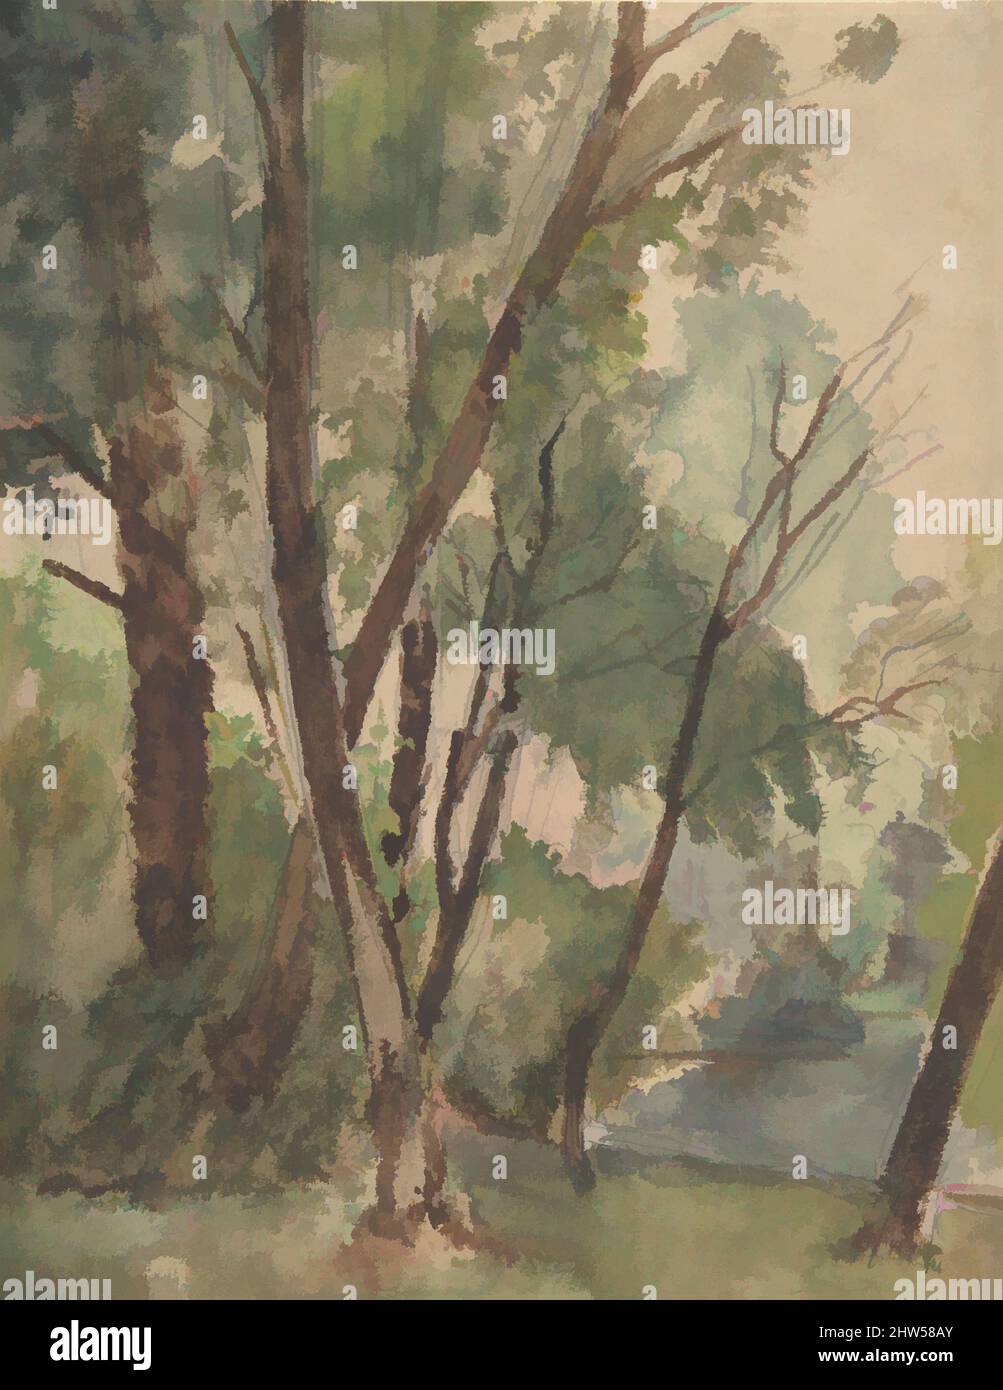 Art inspired by Trees Beside a Pond, 1820–78, Watercolor over graphite, 10 x 7 3/4 in. (25.5 x 19.6 cm), Drawings, Louis-Antoine-Léon Riesener (French, Paris 1808–1878 Paris, Classic works modernized by Artotop with a splash of modernity. Shapes, color and value, eye-catching visual impact on art. Emotions through freedom of artworks in a contemporary way. A timeless message pursuing a wildly creative new direction. Artists turning to the digital medium and creating the Artotop NFT Stock Photo